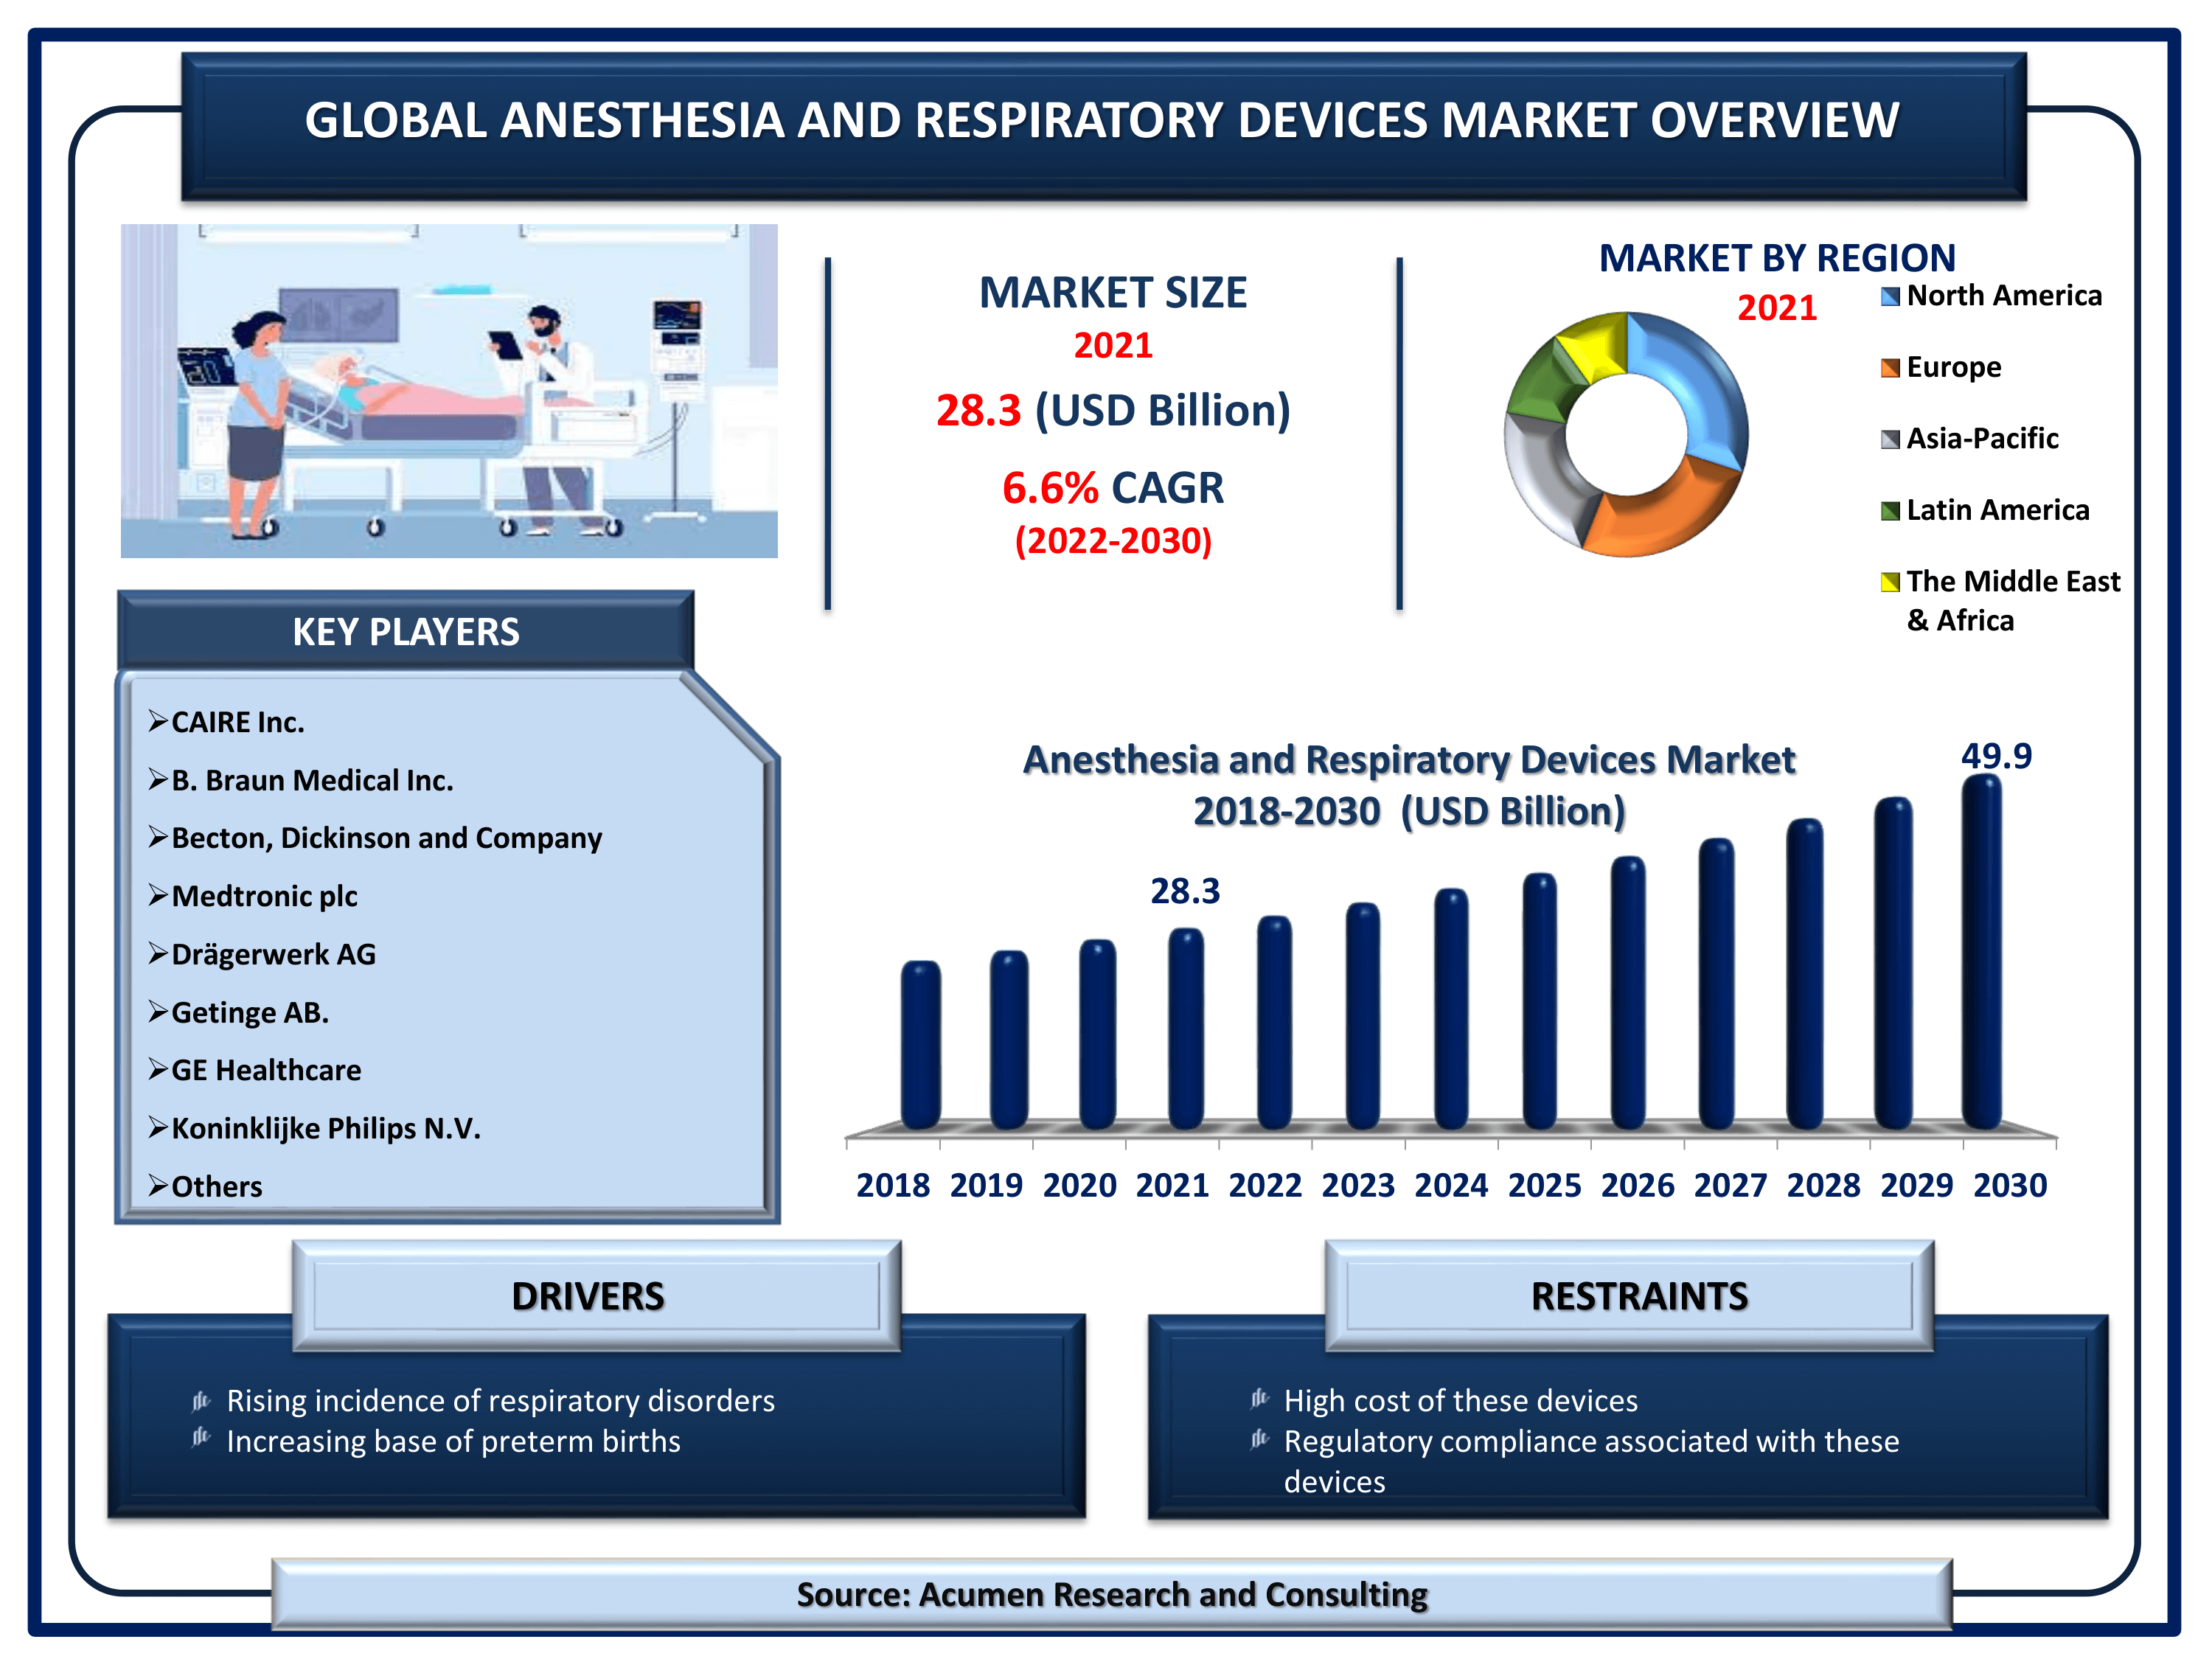 Global anesthesia & respiratory devices market revenue is estimated to reach USD 49.9 Billion by 2030 with a CAGR of 6.5% from 2022 to 2030